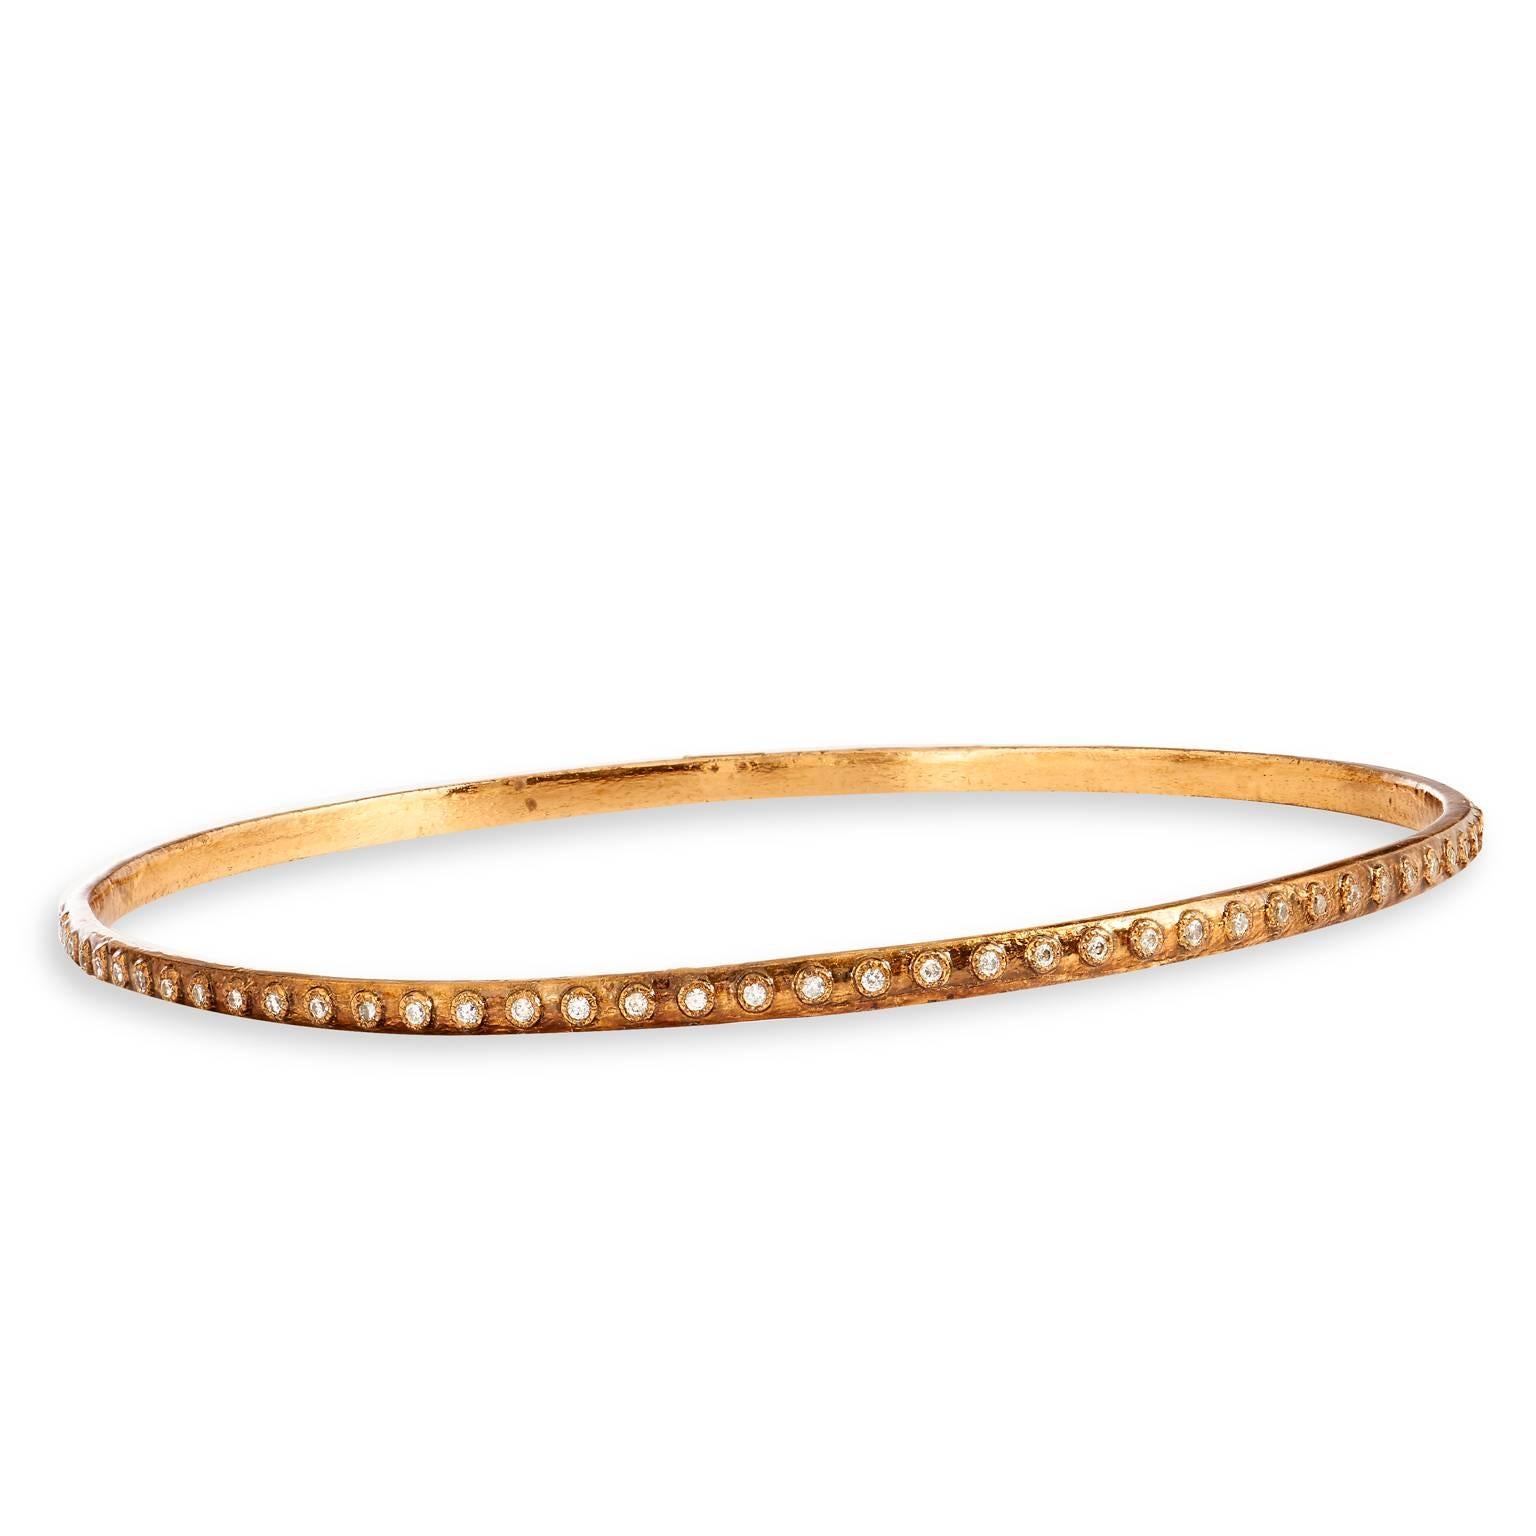 This Armenta bronze bangle is a part of the Aurora collection and features diamonds set on a 1mm wide bracelet.